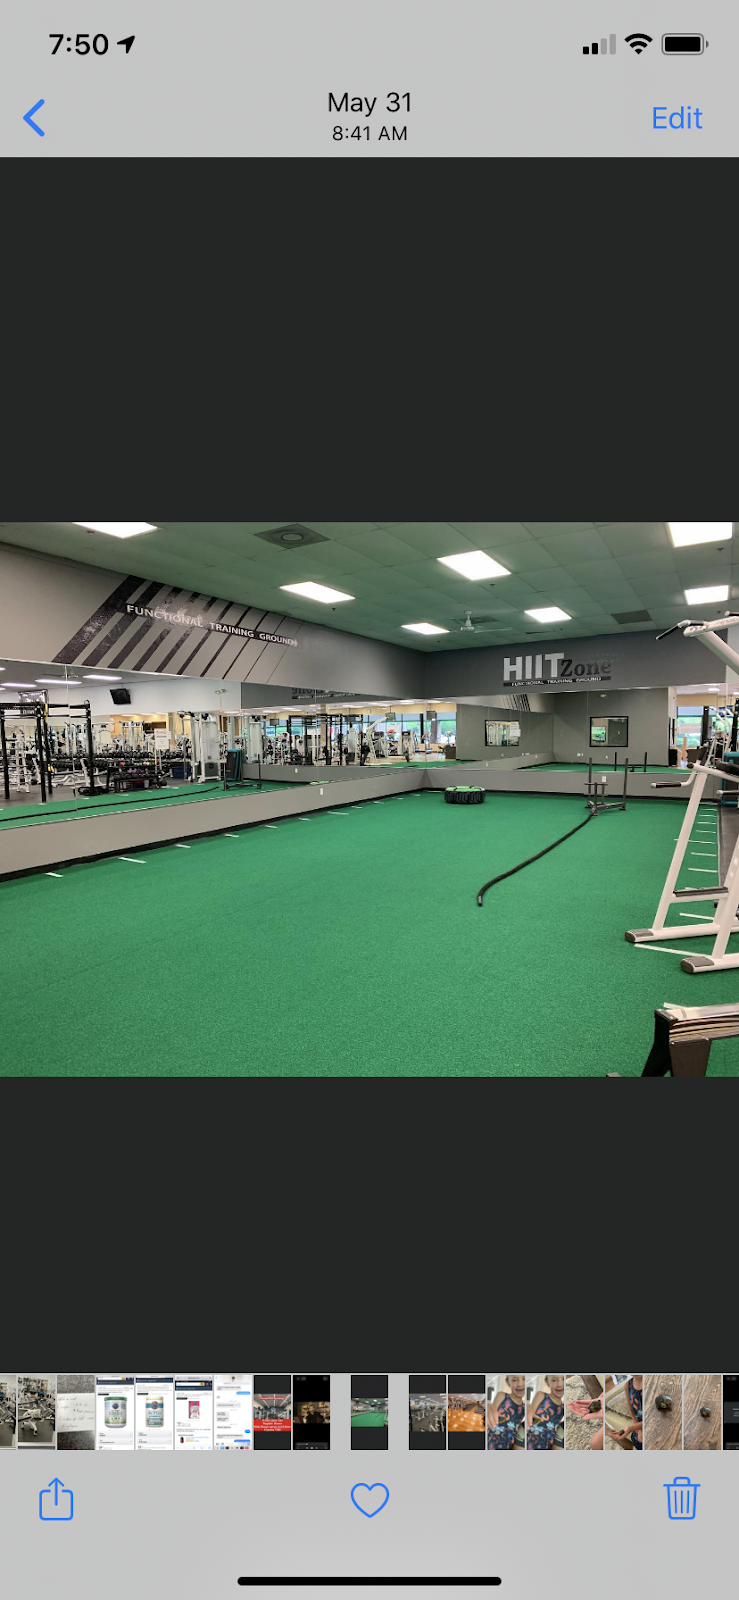 Fitness 19 | 9101 Leesville Rd #129, Raleigh, NC 27613, USA | Phone: (919) 870-0281